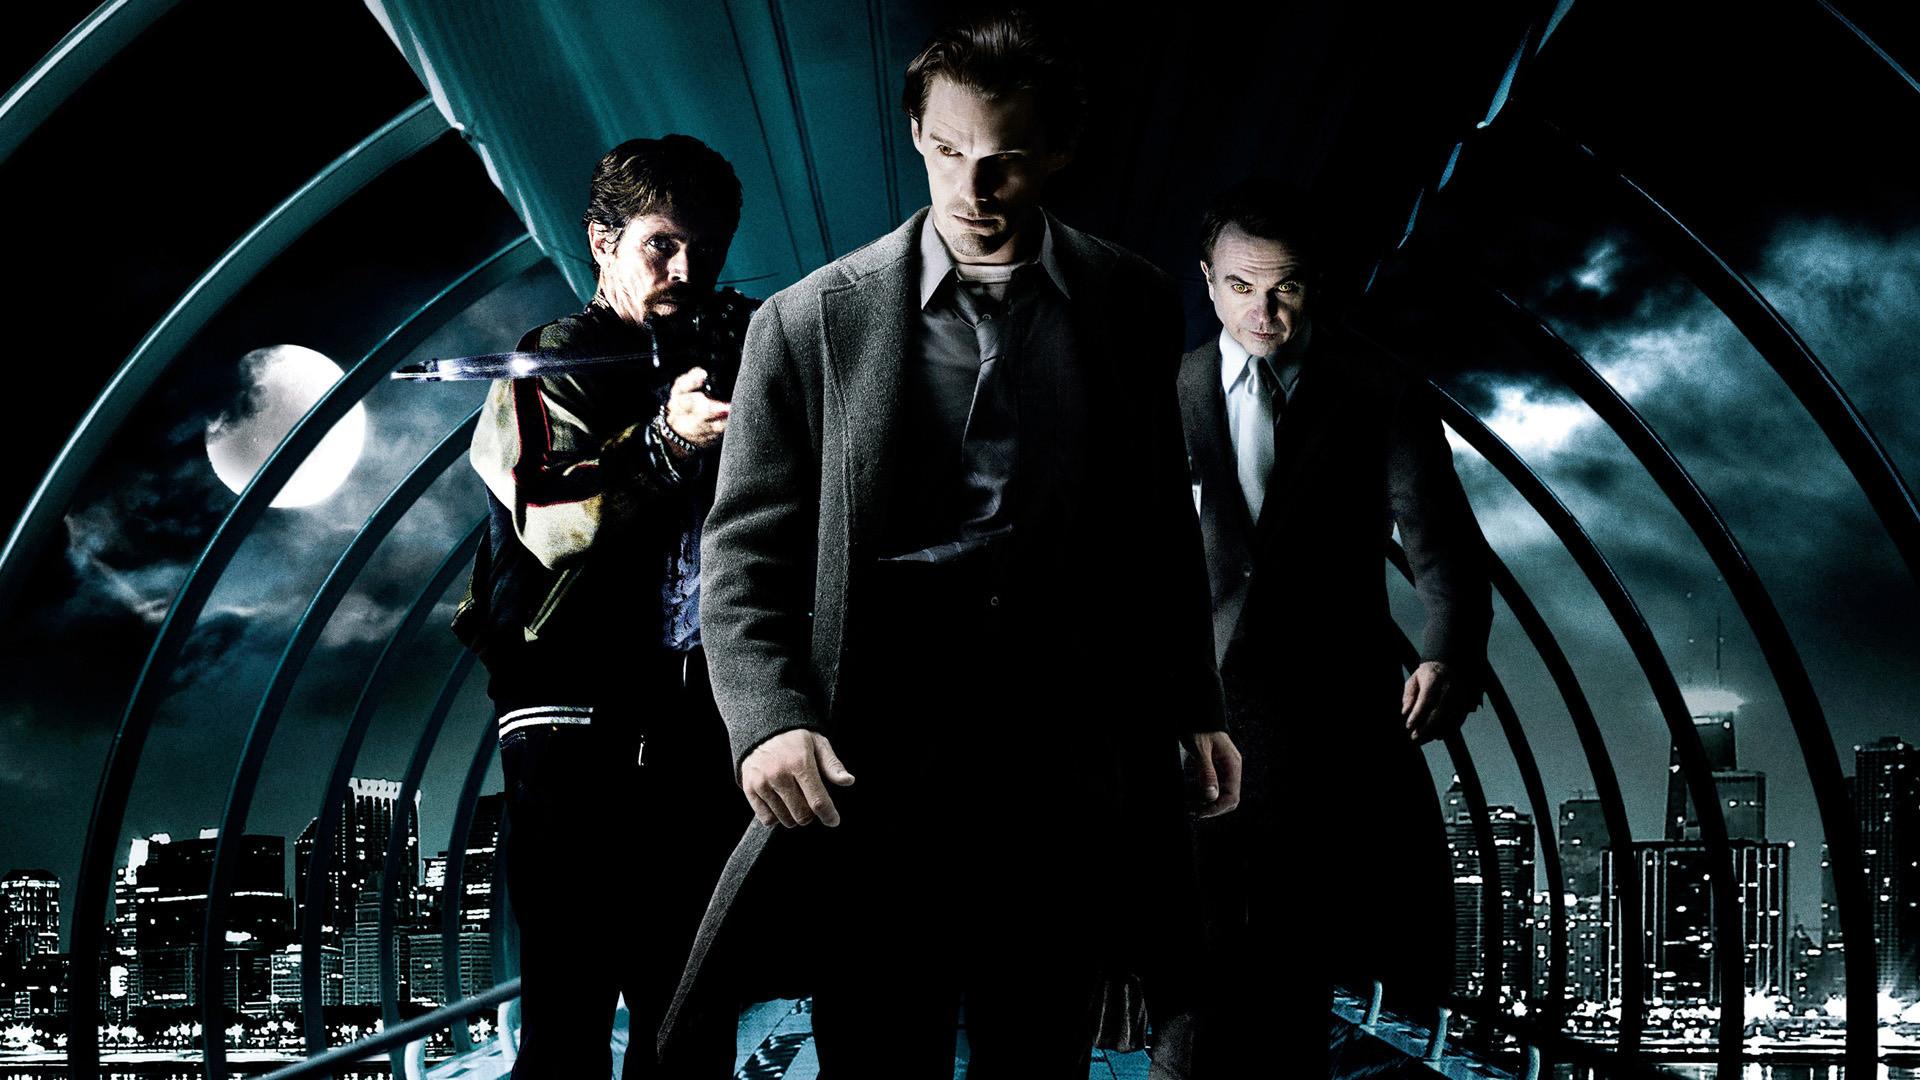 Movie Daybreakers HD Wallpaper | Background Image